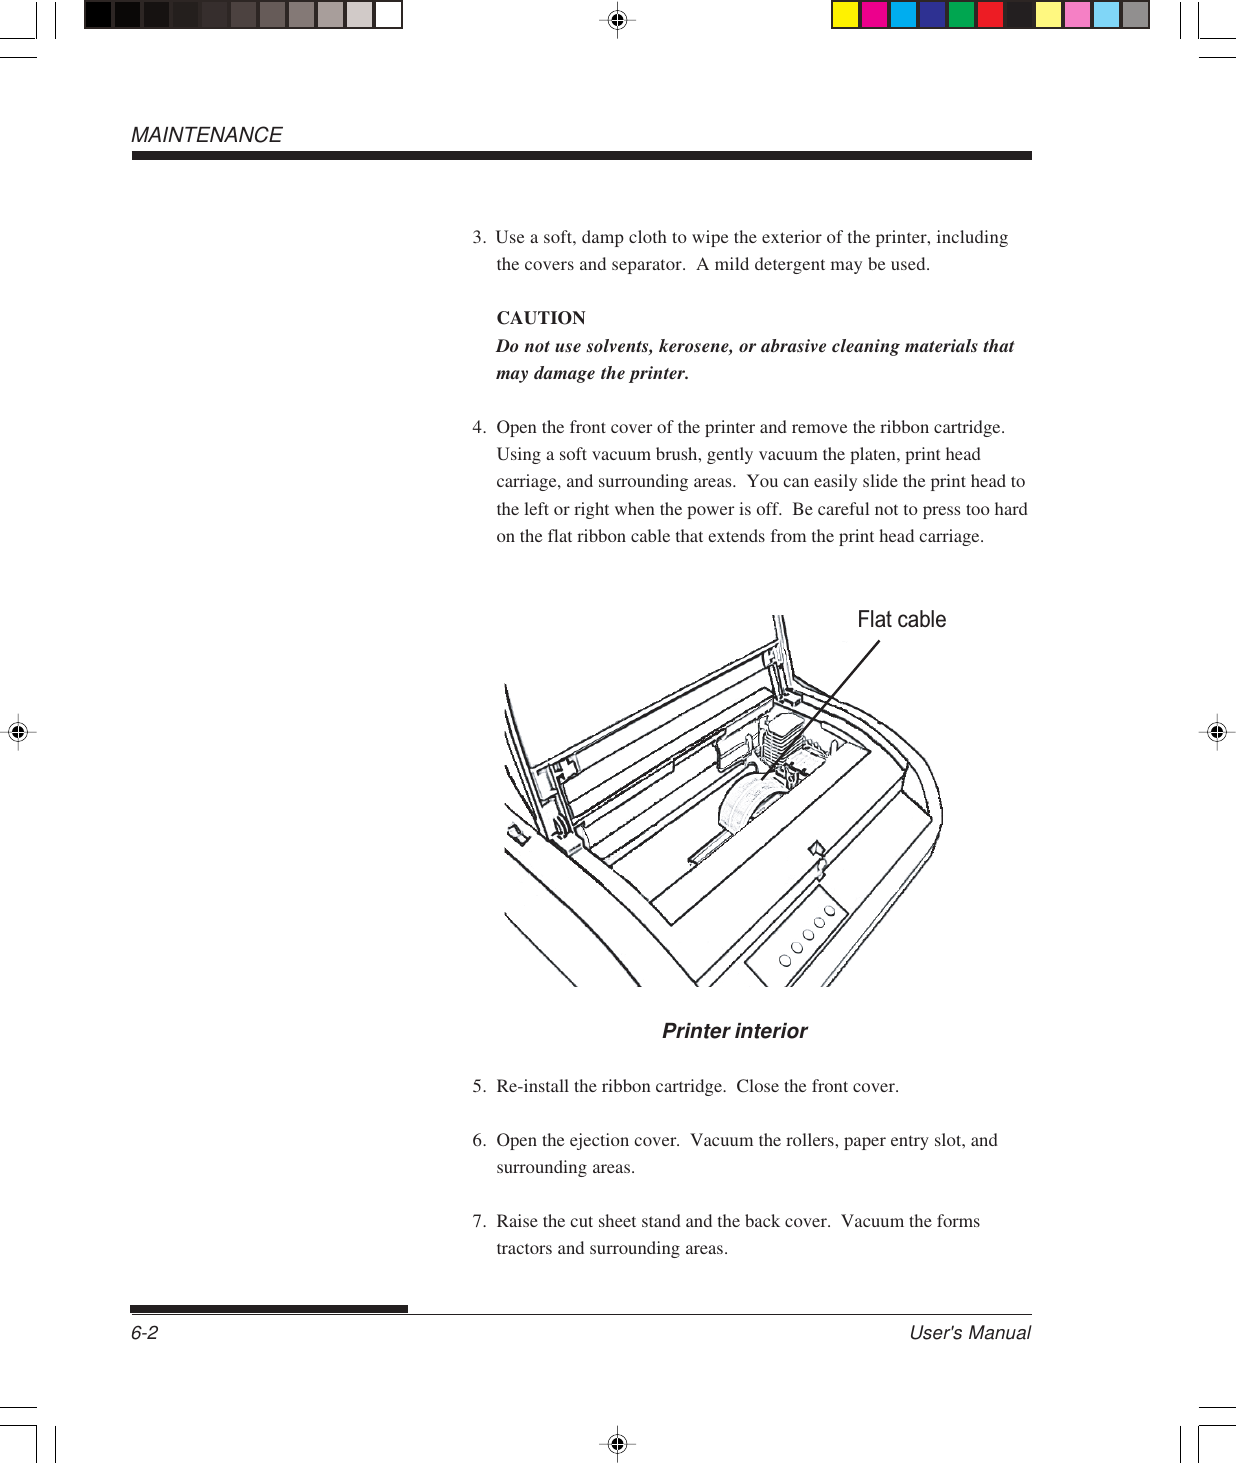 User&apos;s Manual6-2MAINTENANCE3. Use a soft, damp cloth to wipe the exterior of the printer, includingthe covers and separator.  A mild detergent may be used.CAUTIONDo not use solvents, kerosene, or abrasive cleaning materials thatmay damage the printer.4. Open the front cover of the printer and remove the ribbon cartridge.Using a soft vacuum brush, gently vacuum the platen, print headcarriage, and surrounding areas.  You can easily slide the print head tothe left or right when the power is off.  Be careful not to press too hardon the flat ribbon cable that extends from the print head carriage.Flat cablePrinter interior5. Re-install the ribbon cartridge.  Close the front cover.6. Open the ejection cover.  Vacuum the rollers, paper entry slot, andsurrounding areas.7. Raise the cut sheet stand and the back cover.  Vacuum the formstractors and surrounding areas.